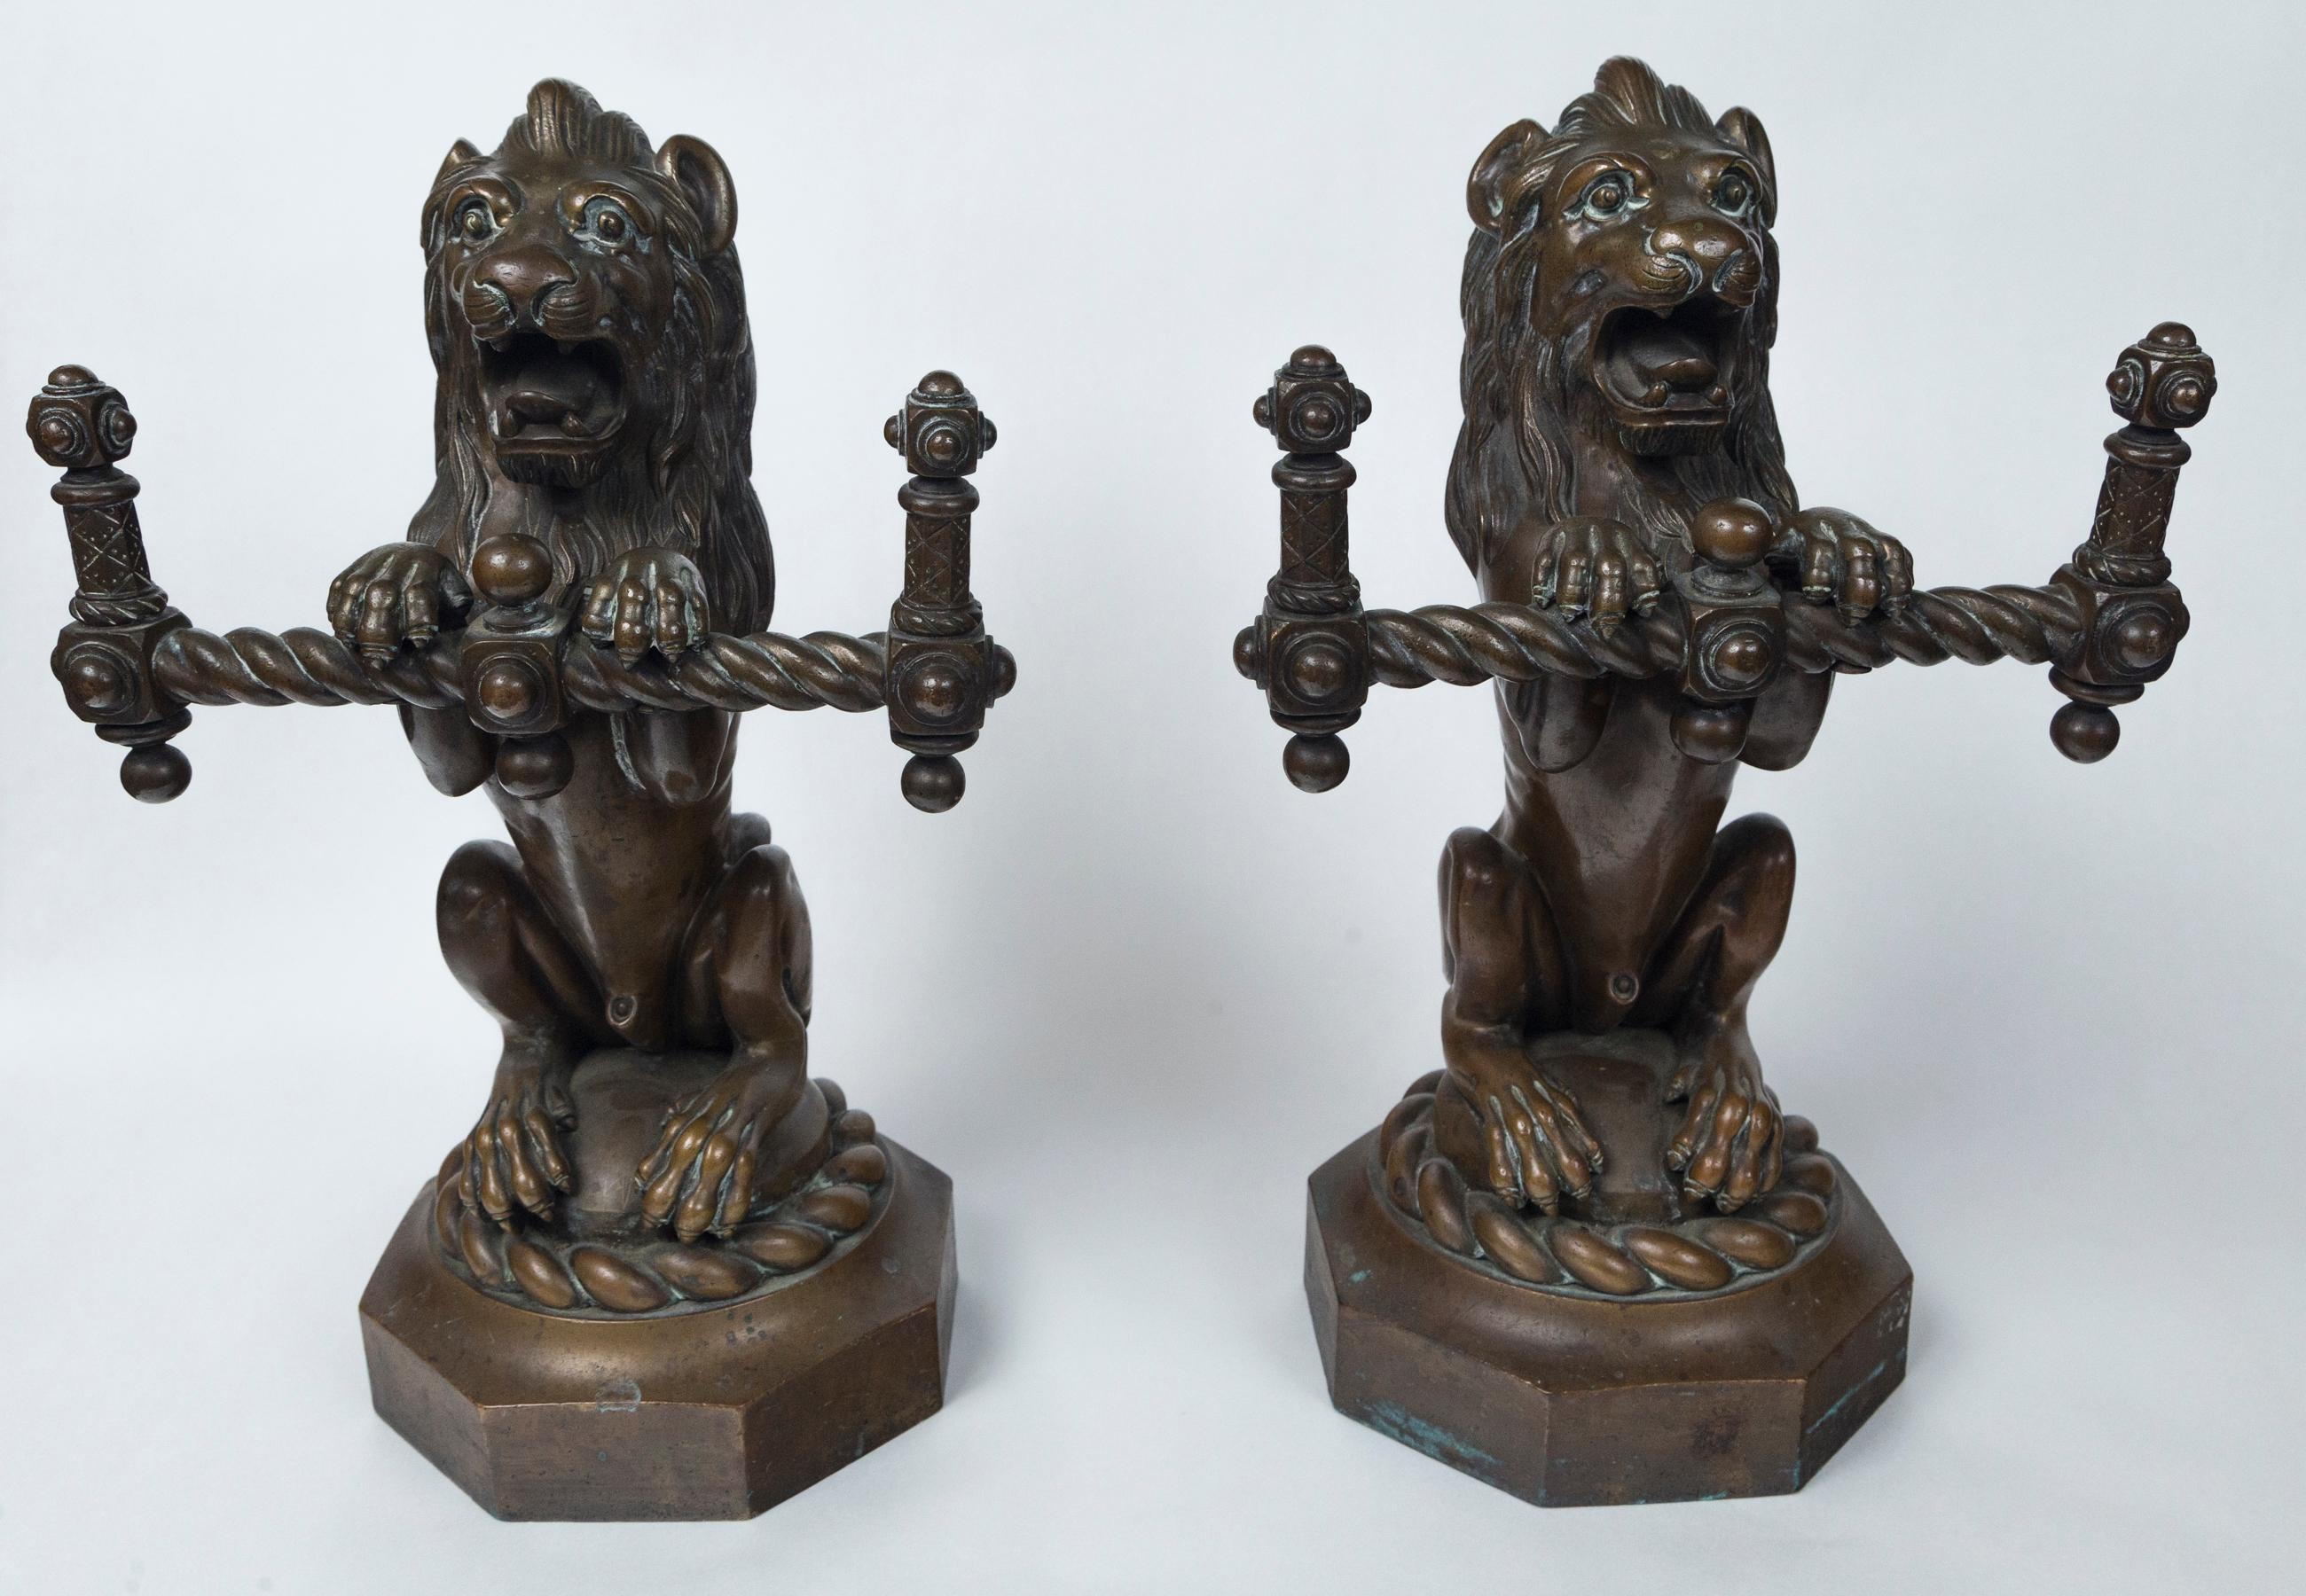 An usual pair of bronze lions, sitting on their haunches, upon an attached 6 sided cast bronze base. The base is 1.5 inches in height and measures 6 inches in diameter. The overall height is 14.5 inches.
Each lion holds a horizontal bronze bar,